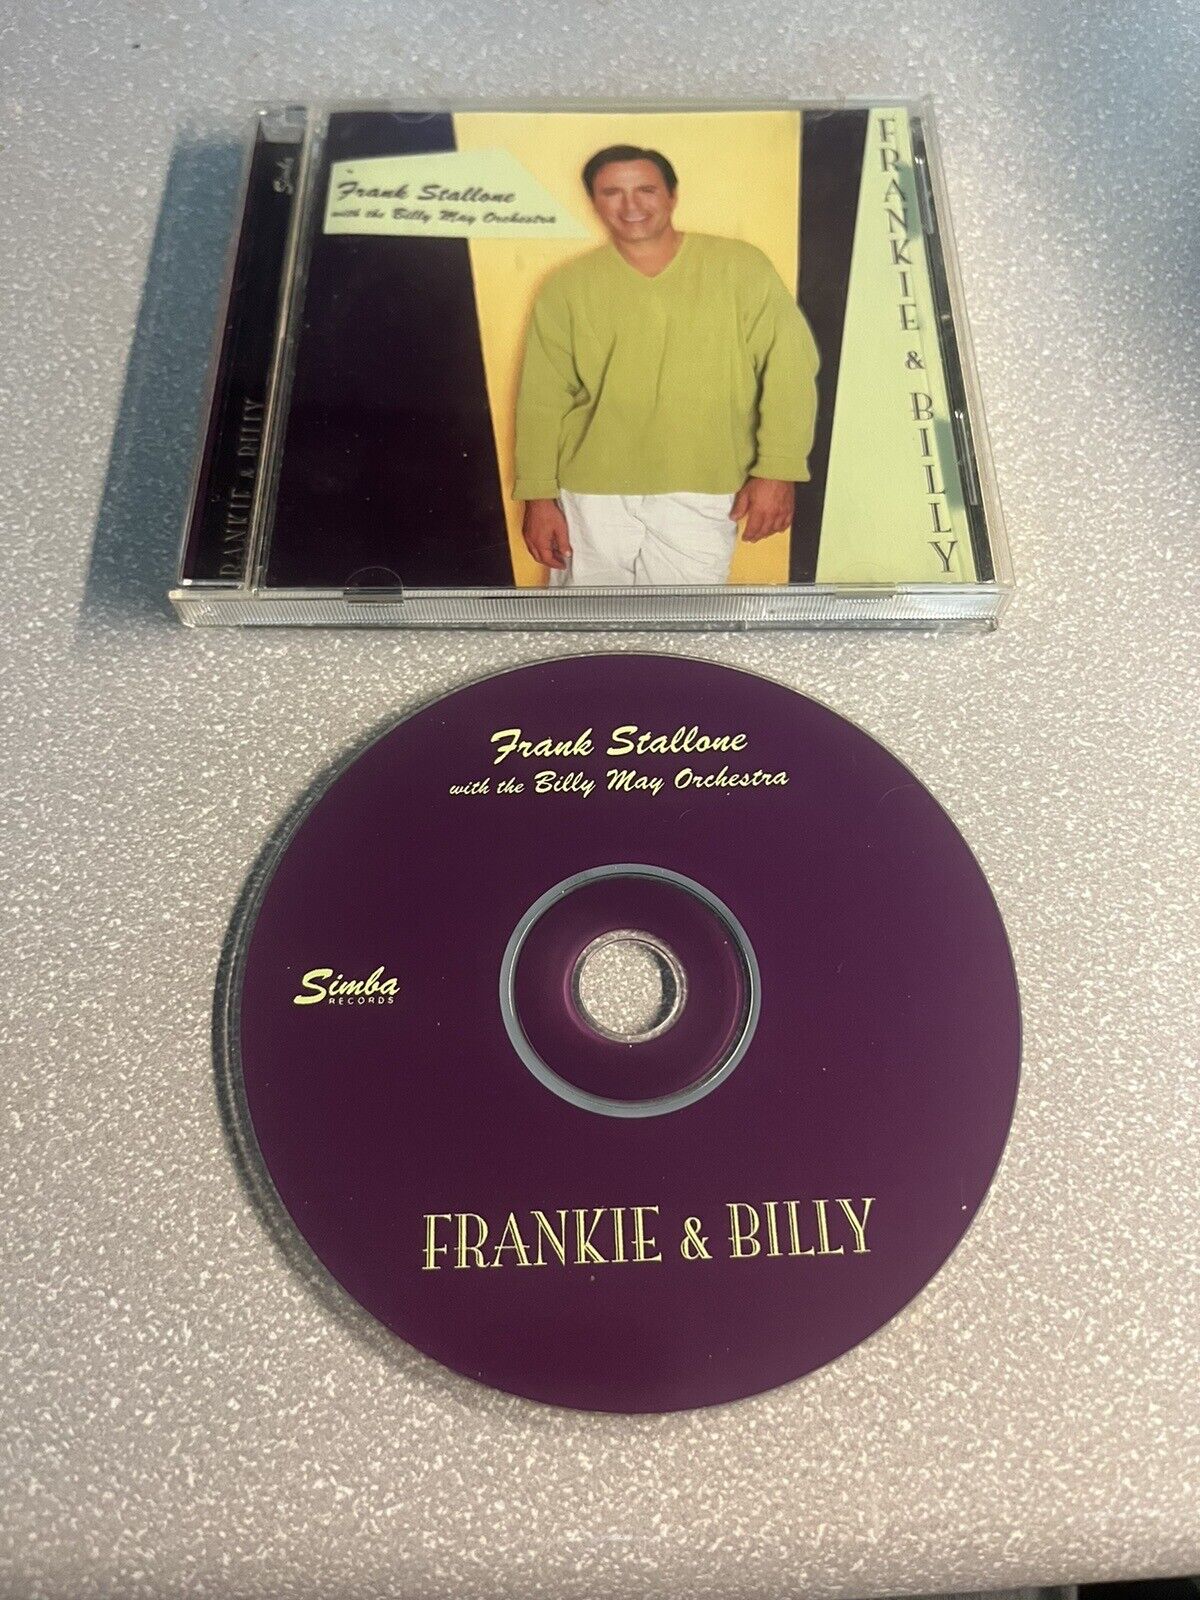 RARE JAZZ MUSIC CD - FRANK STALLONE & THE BILLY MAY ORCHESTRA - “FRANKIE & BILLY